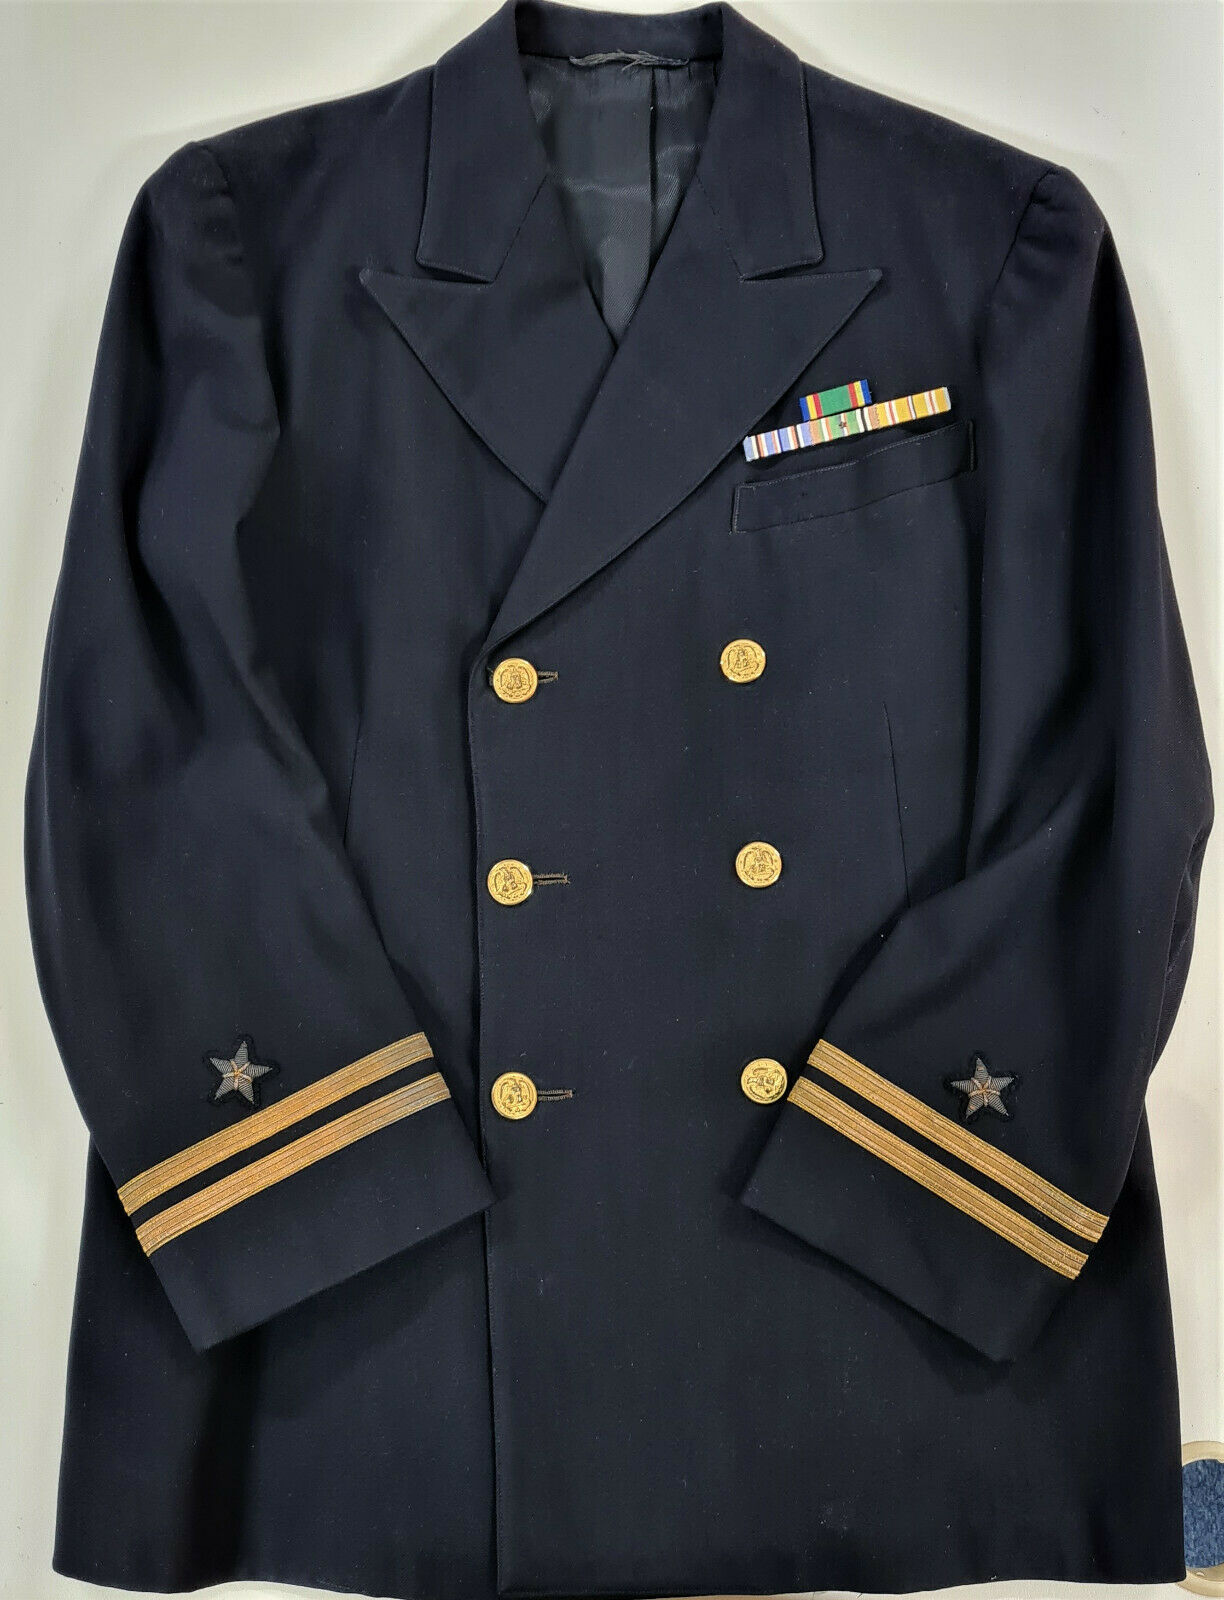 VINTAGE WW2 US NAVY OFFICER’S UNIFORM JACKET WITH PATCHES & BADGES USN ...